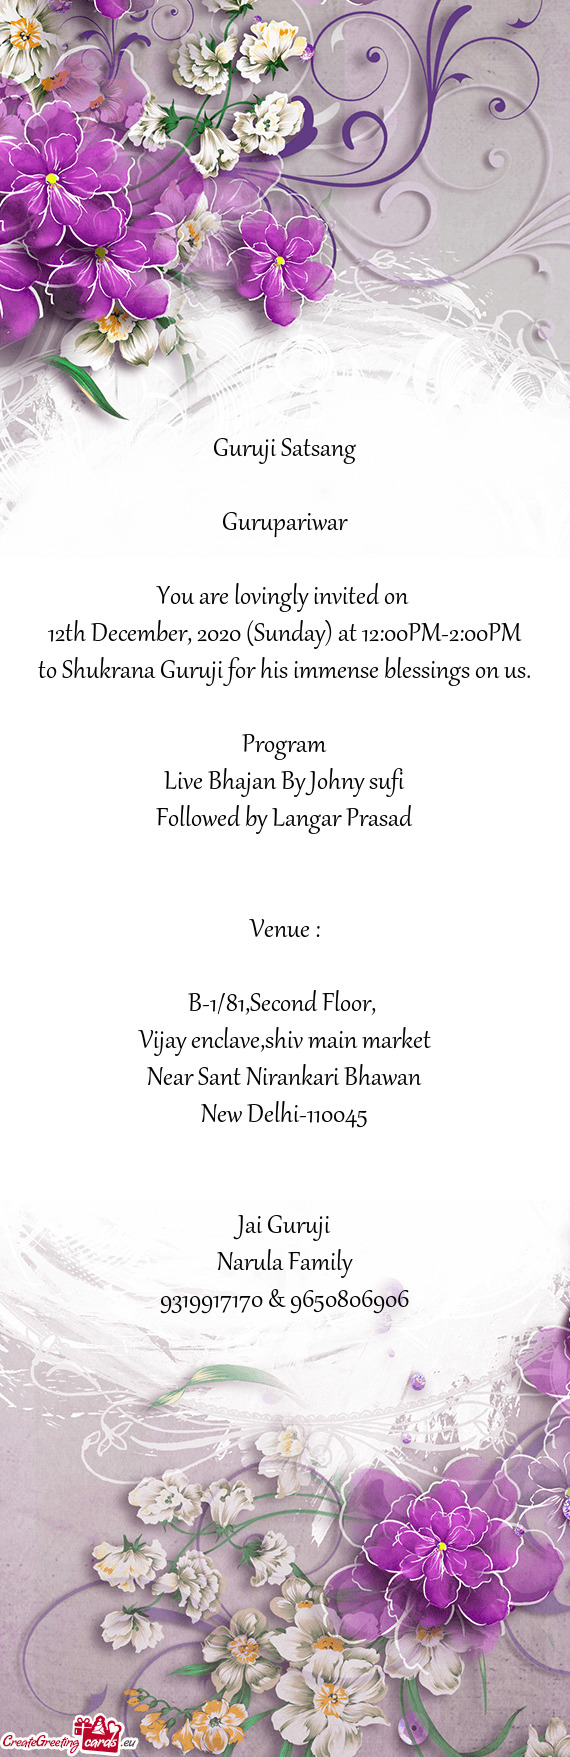 12th December, 2020 (Sunday) at 12:00PM-2:00PM